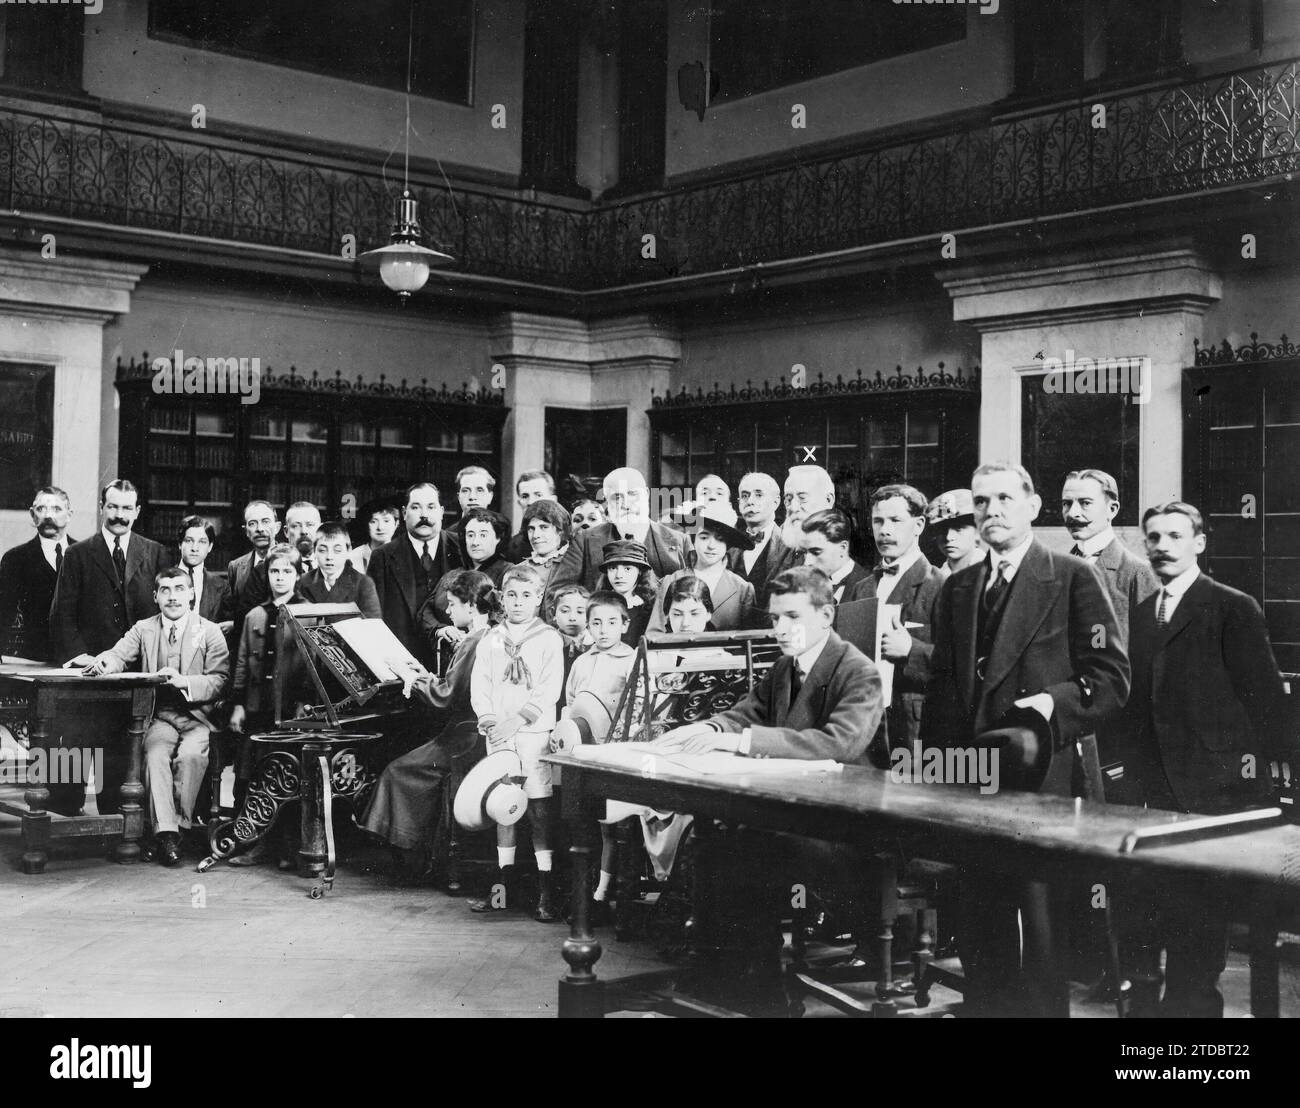 Madrid, 05/28/1916. In the National Library. The distinguished director, Mr. Francisco Rodríguez Marín (x) with the blind boys and girls, during the reading of works by Cervantes, carried out by them as the end of the tribute they have paid to the immortal author of 'Don Quixote'. Credit: Album / Archivo ABC / Julio Duque Stock Photo